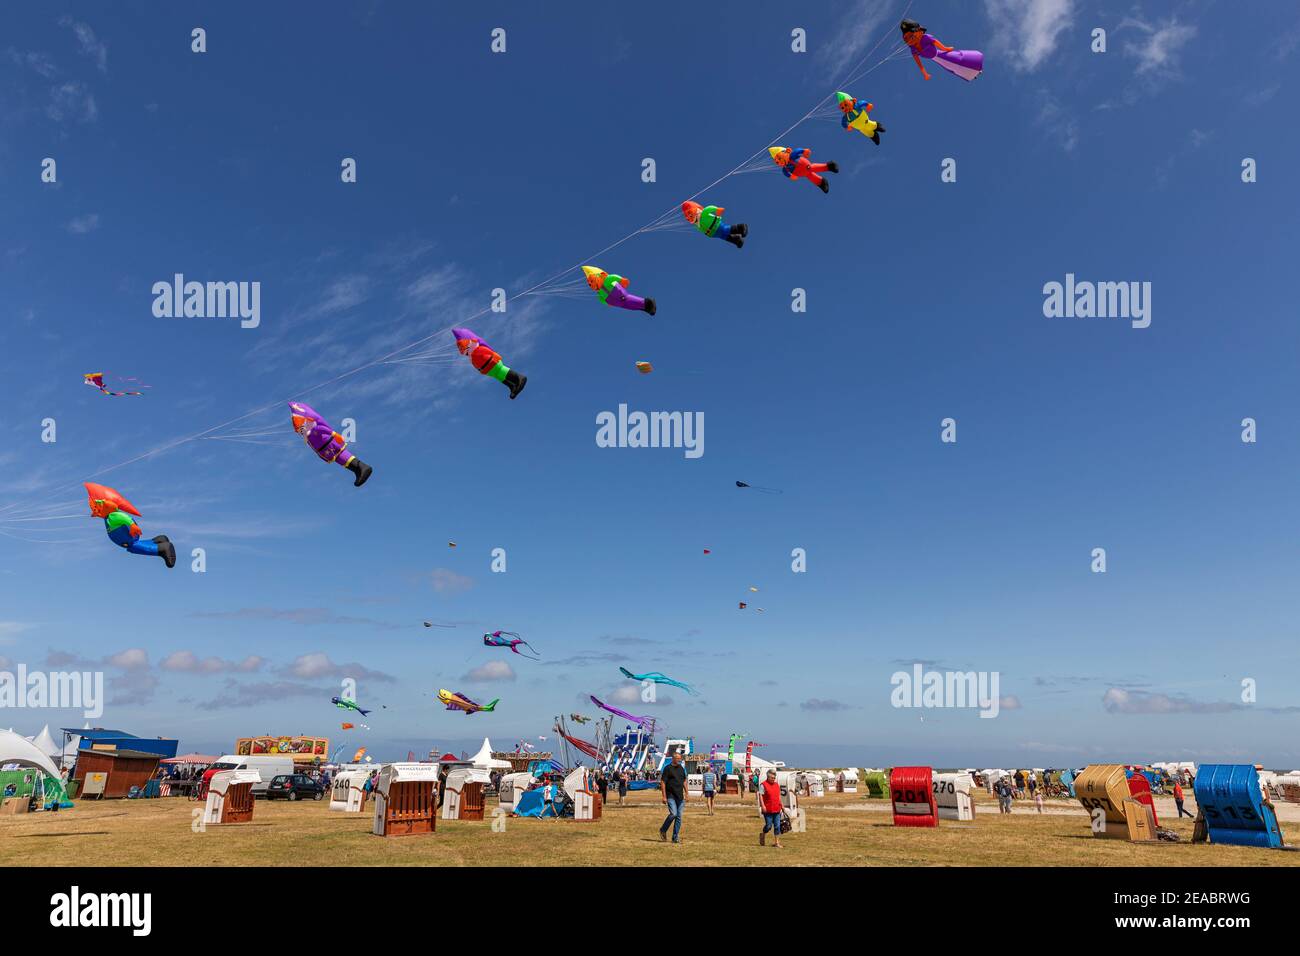 Fairy tale characters, Snow White and the seven dwarfs, 14th International Kite Festival in Schillig, district of the municipality of Wangerland, Friesland district, Lower Saxony, Stock Photo